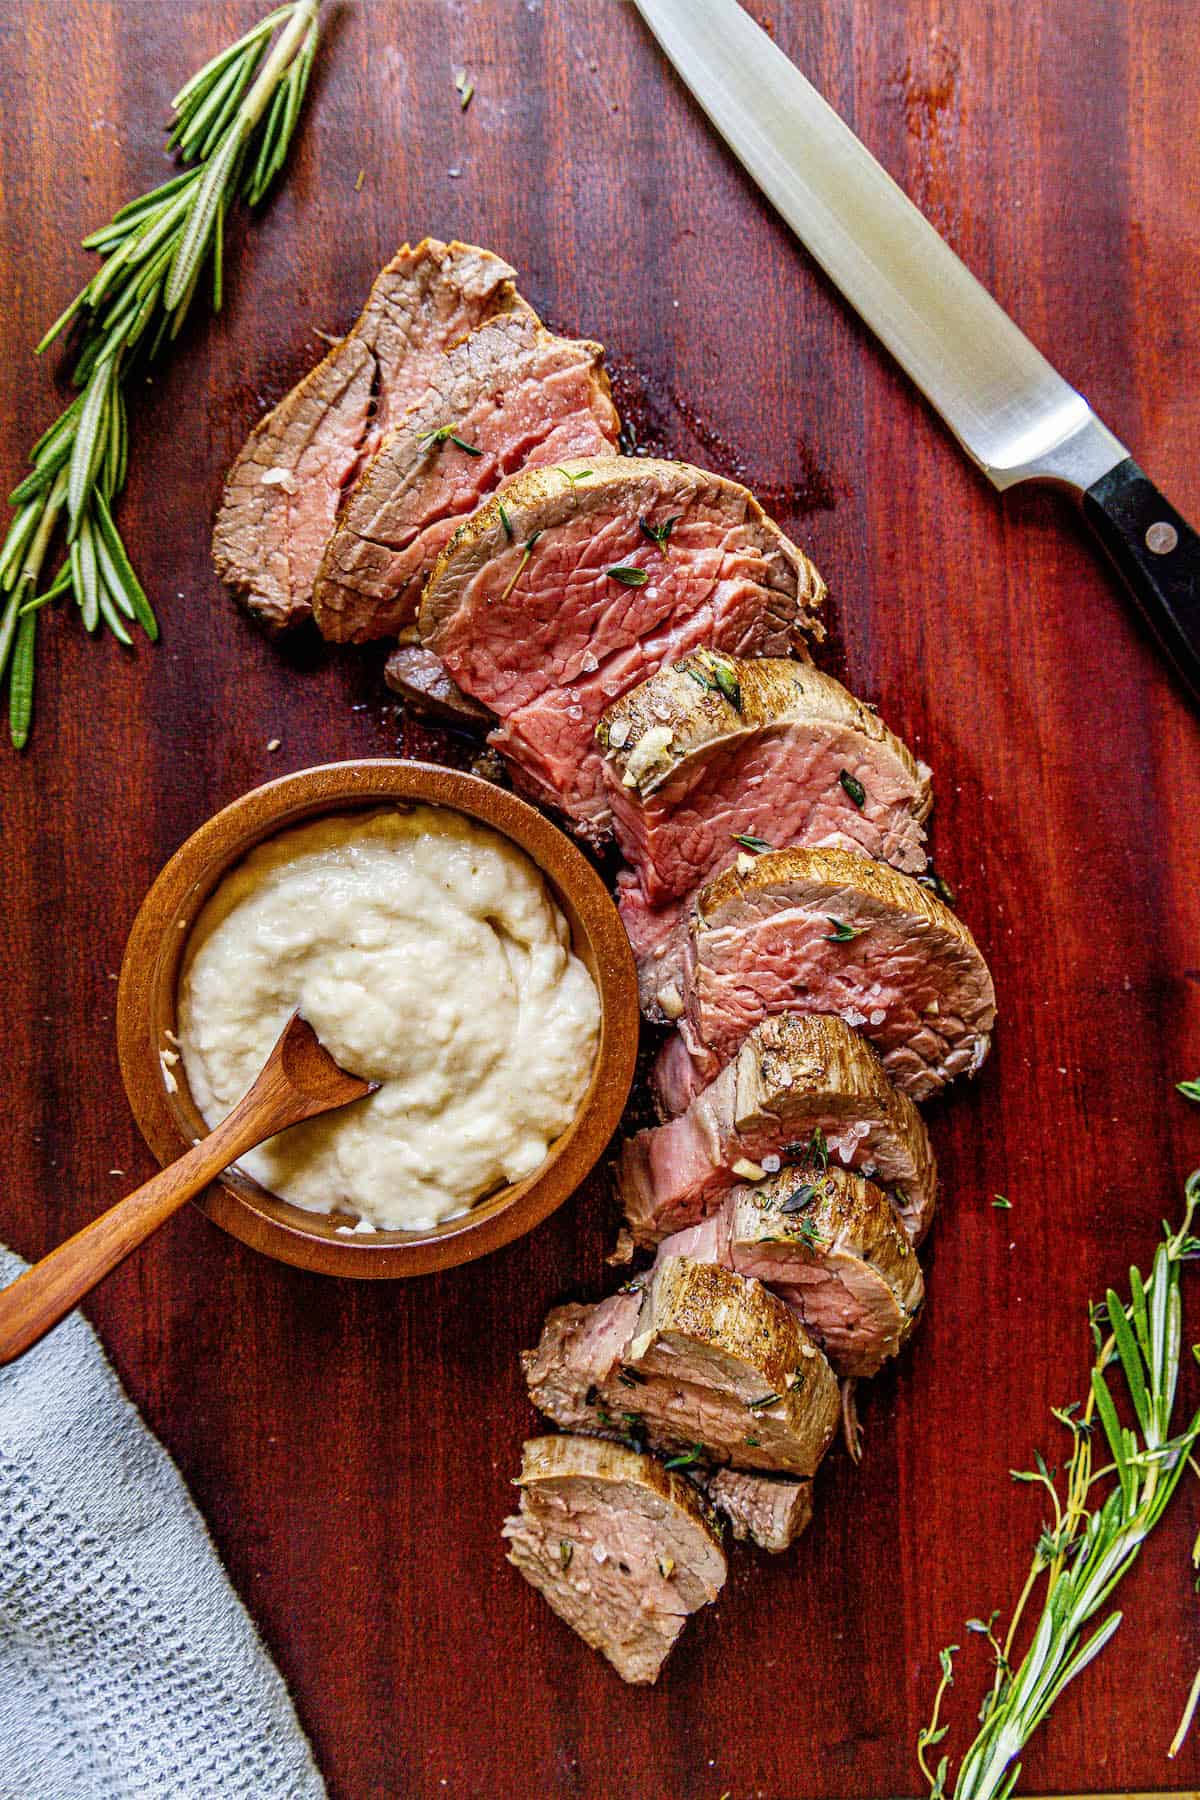 A garlic-infused beef tenderloin on a cutting board, garnished with sprigs of rosemary.